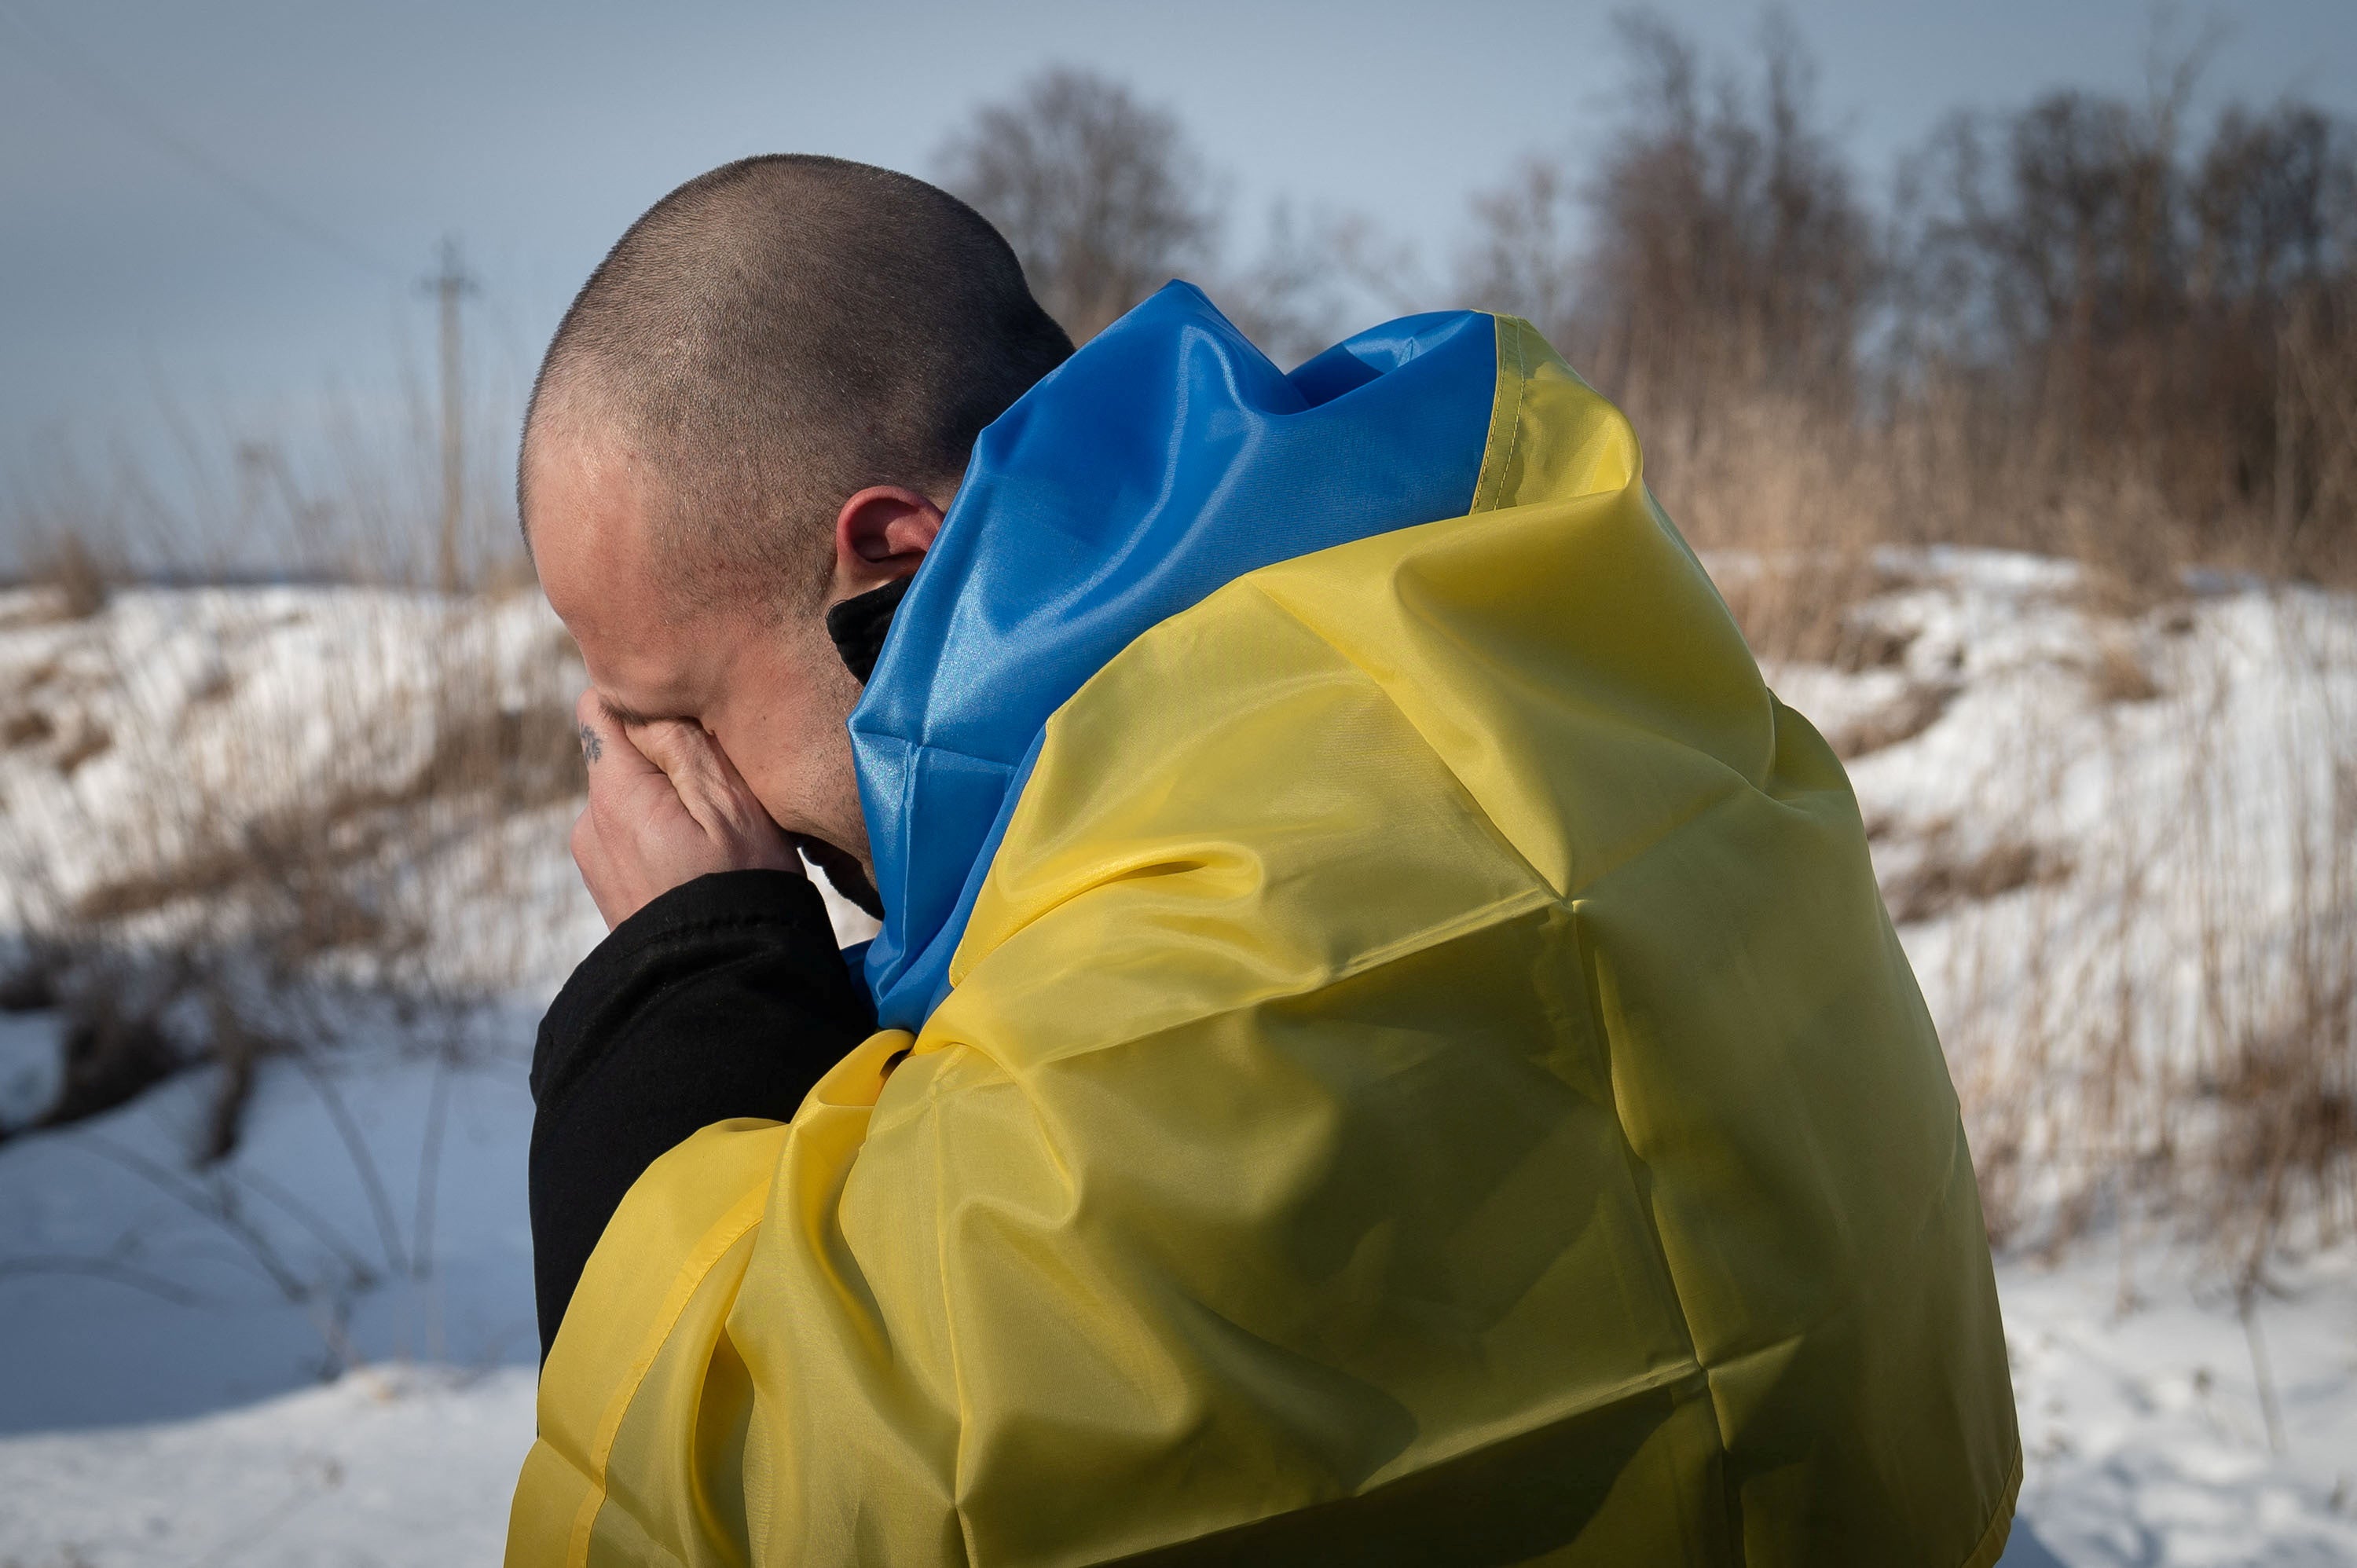 A Ukrainian prisoner of war (POWs) reacts after a swap, amid Russia’s attack on Ukraine, at an unknown location in Ukraine